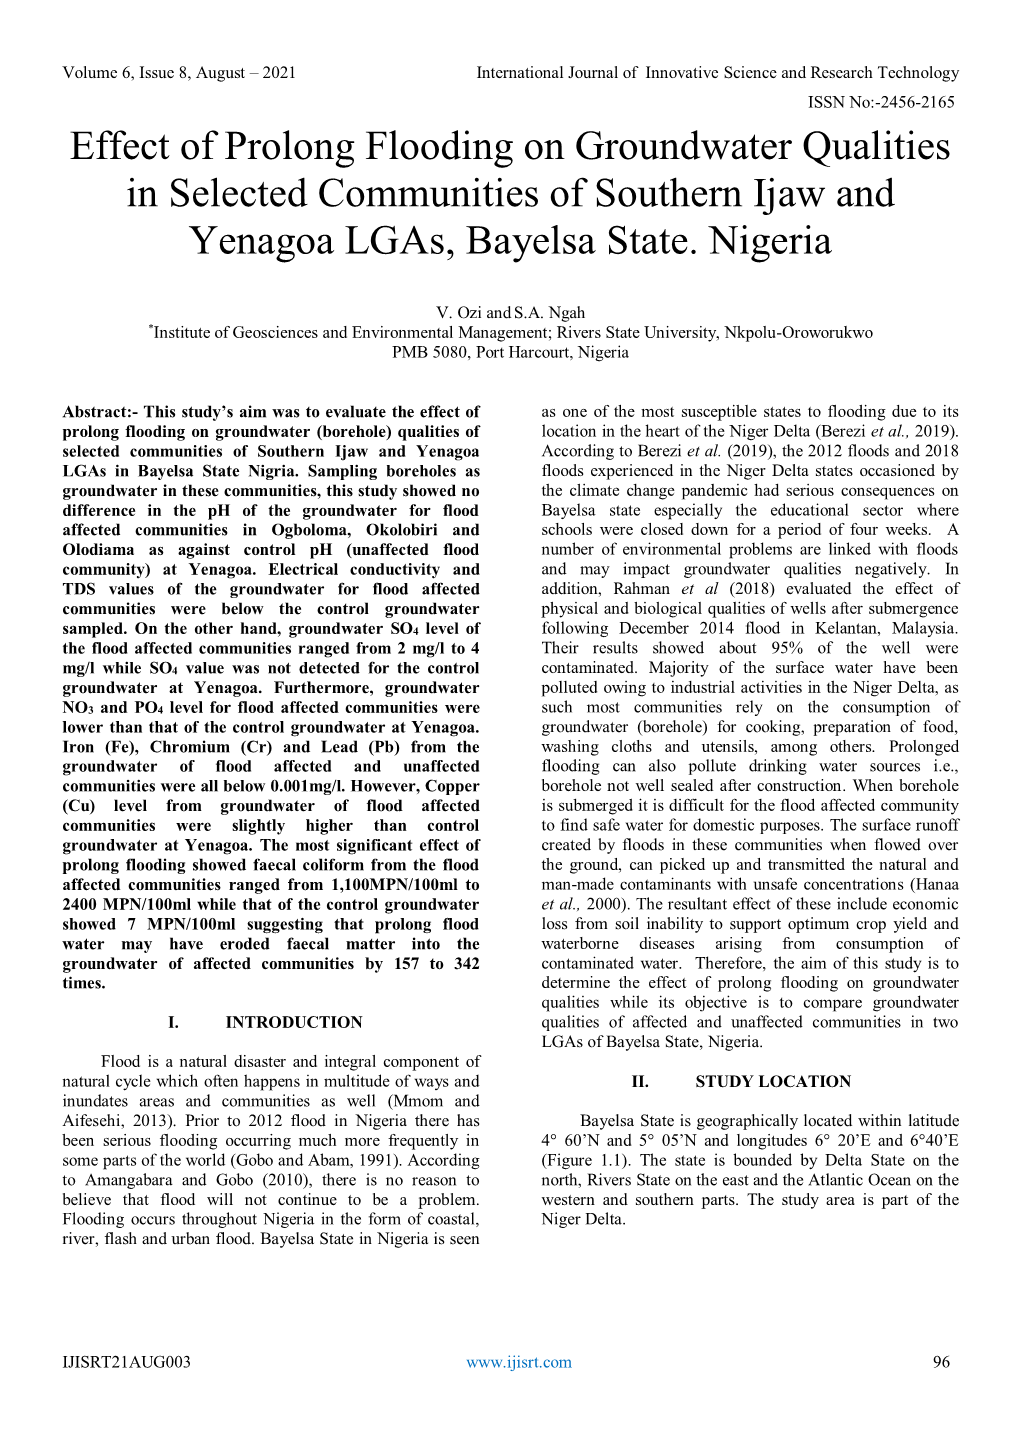 Effect of Prolong Flooding on Groundwater Qualities in Selected Communities of Southern Ijaw and Yenagoa Lgas, Bayelsa State